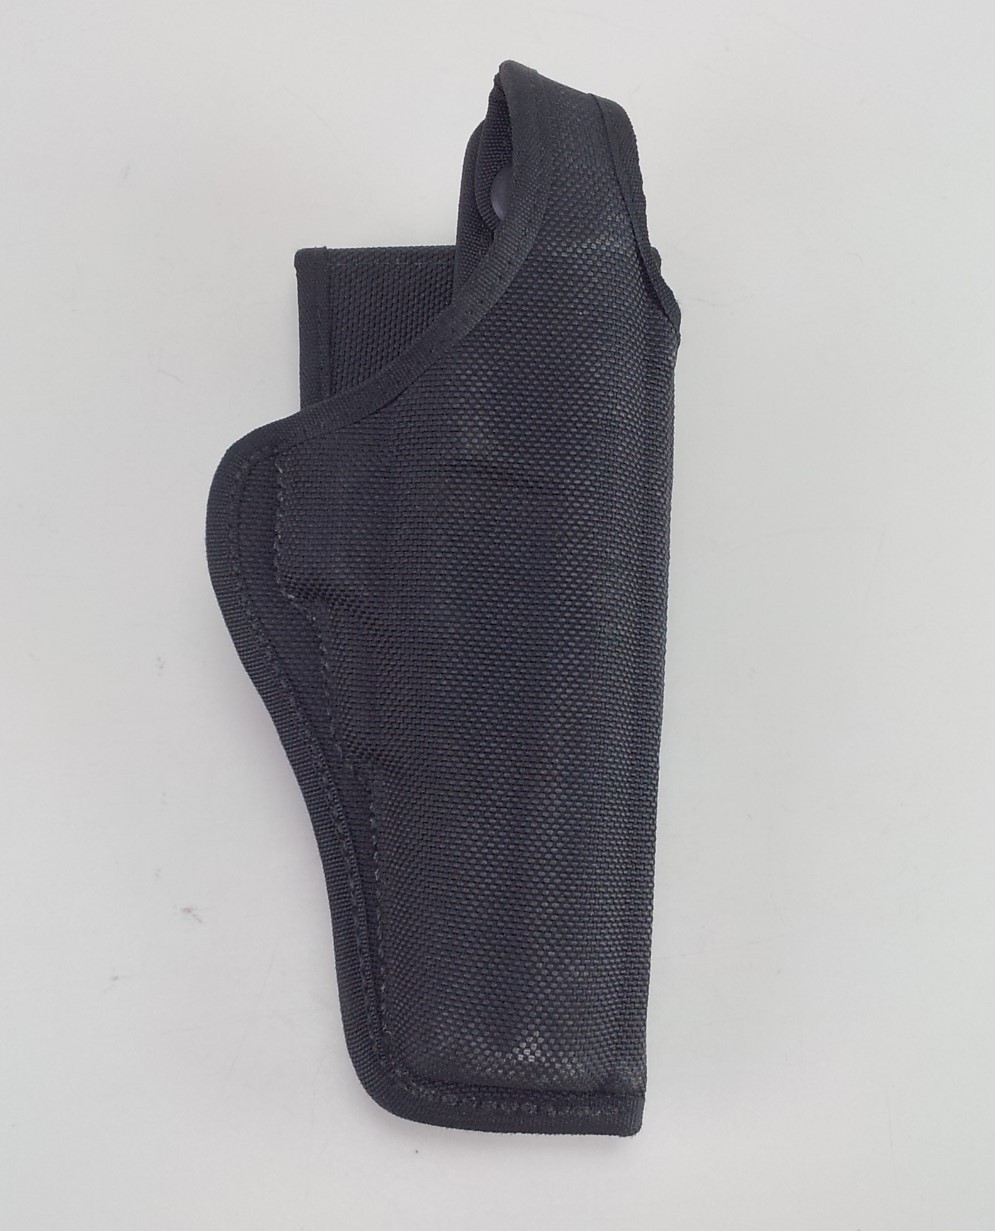 Bianchi AccuMold Defender Holster 7120 size 15 Right Hand